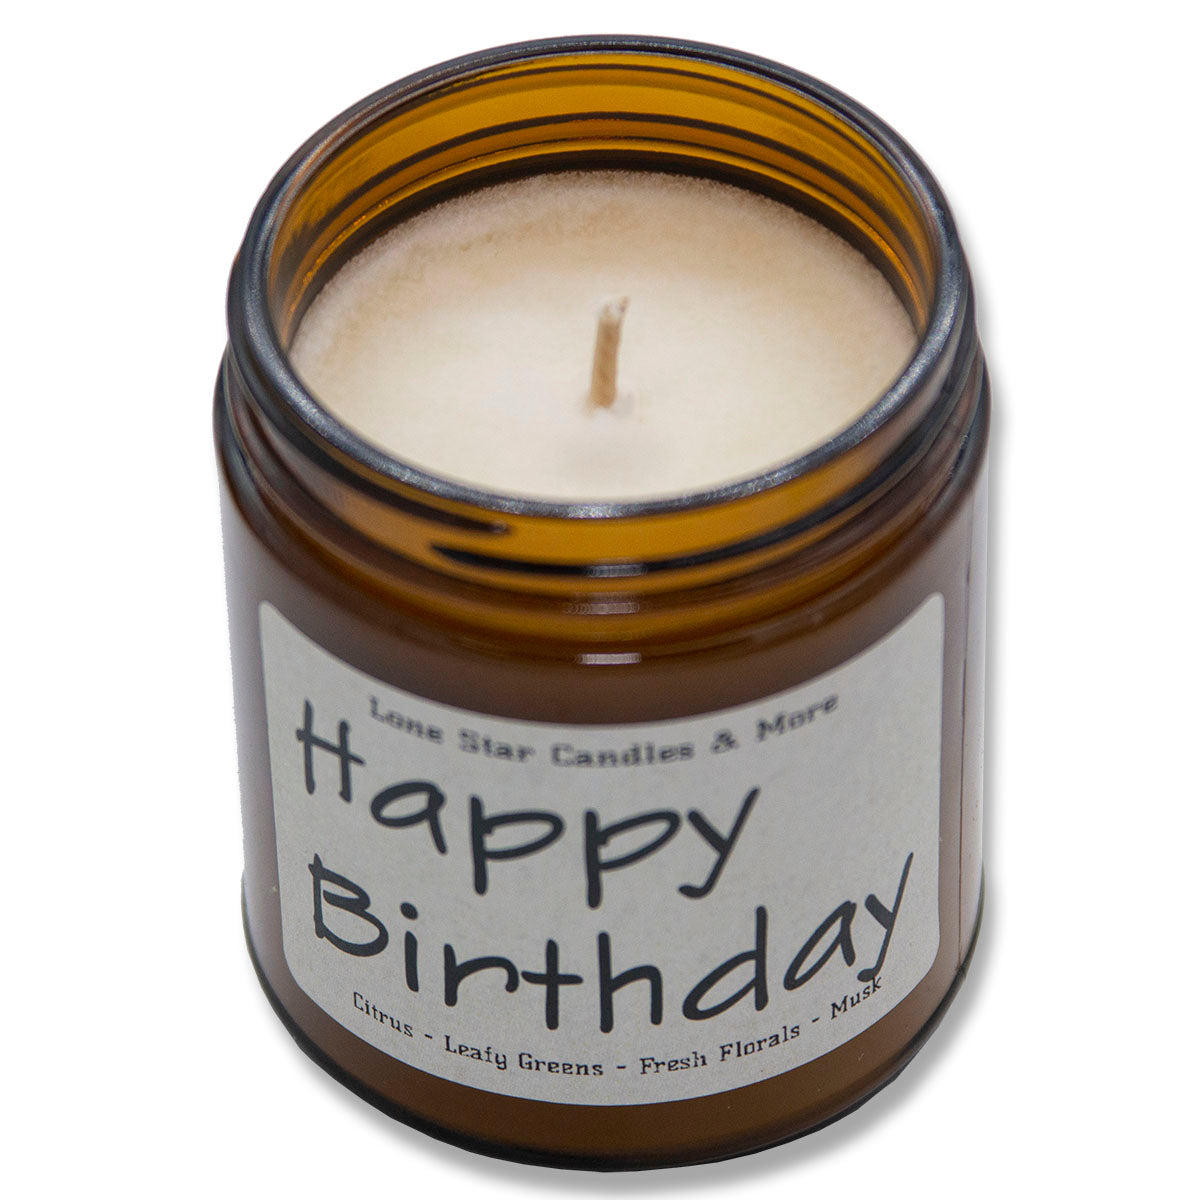 Summer Linen, Lone Star Candles & More's Premium Hand Poured Strongly Scented Soy Wax Gift Candle, A Breath of Fresh Air and Clean Linens, USA Made in Texas, Amber Glass Jar 9oz Happy Birthday